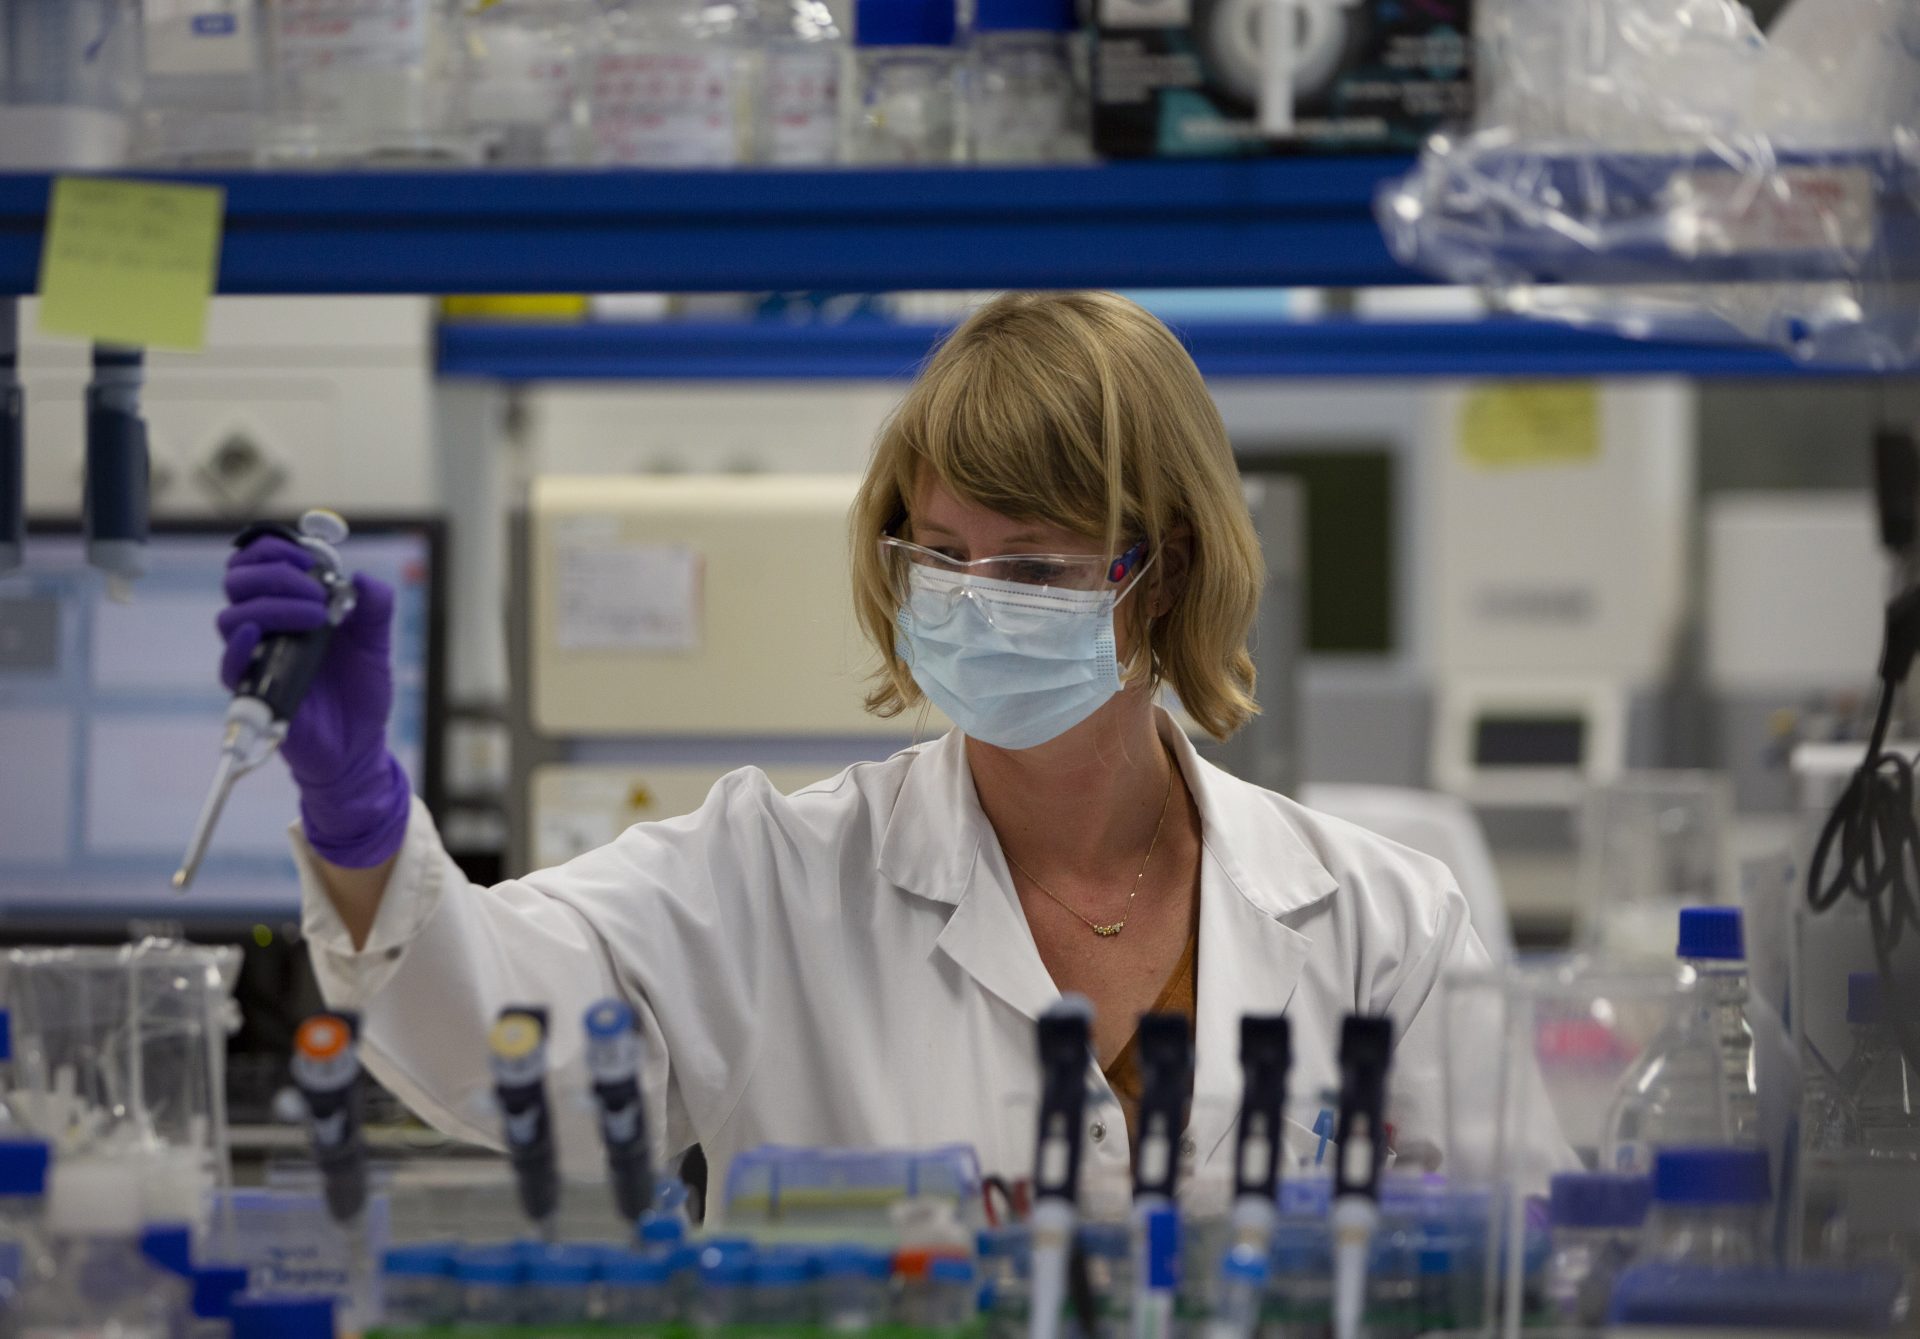 A lab technician works during research on coronavirus, COVID-19, at Johnson & Johnson subsidiary Janssen Pharmaceutical in Beerse, Belgium, Wednesday, June 17, 2020. Janssen Pharmaceutical hopes to begin clinical trials on a potential vaccine for COVID-19 in the middle of the summer.